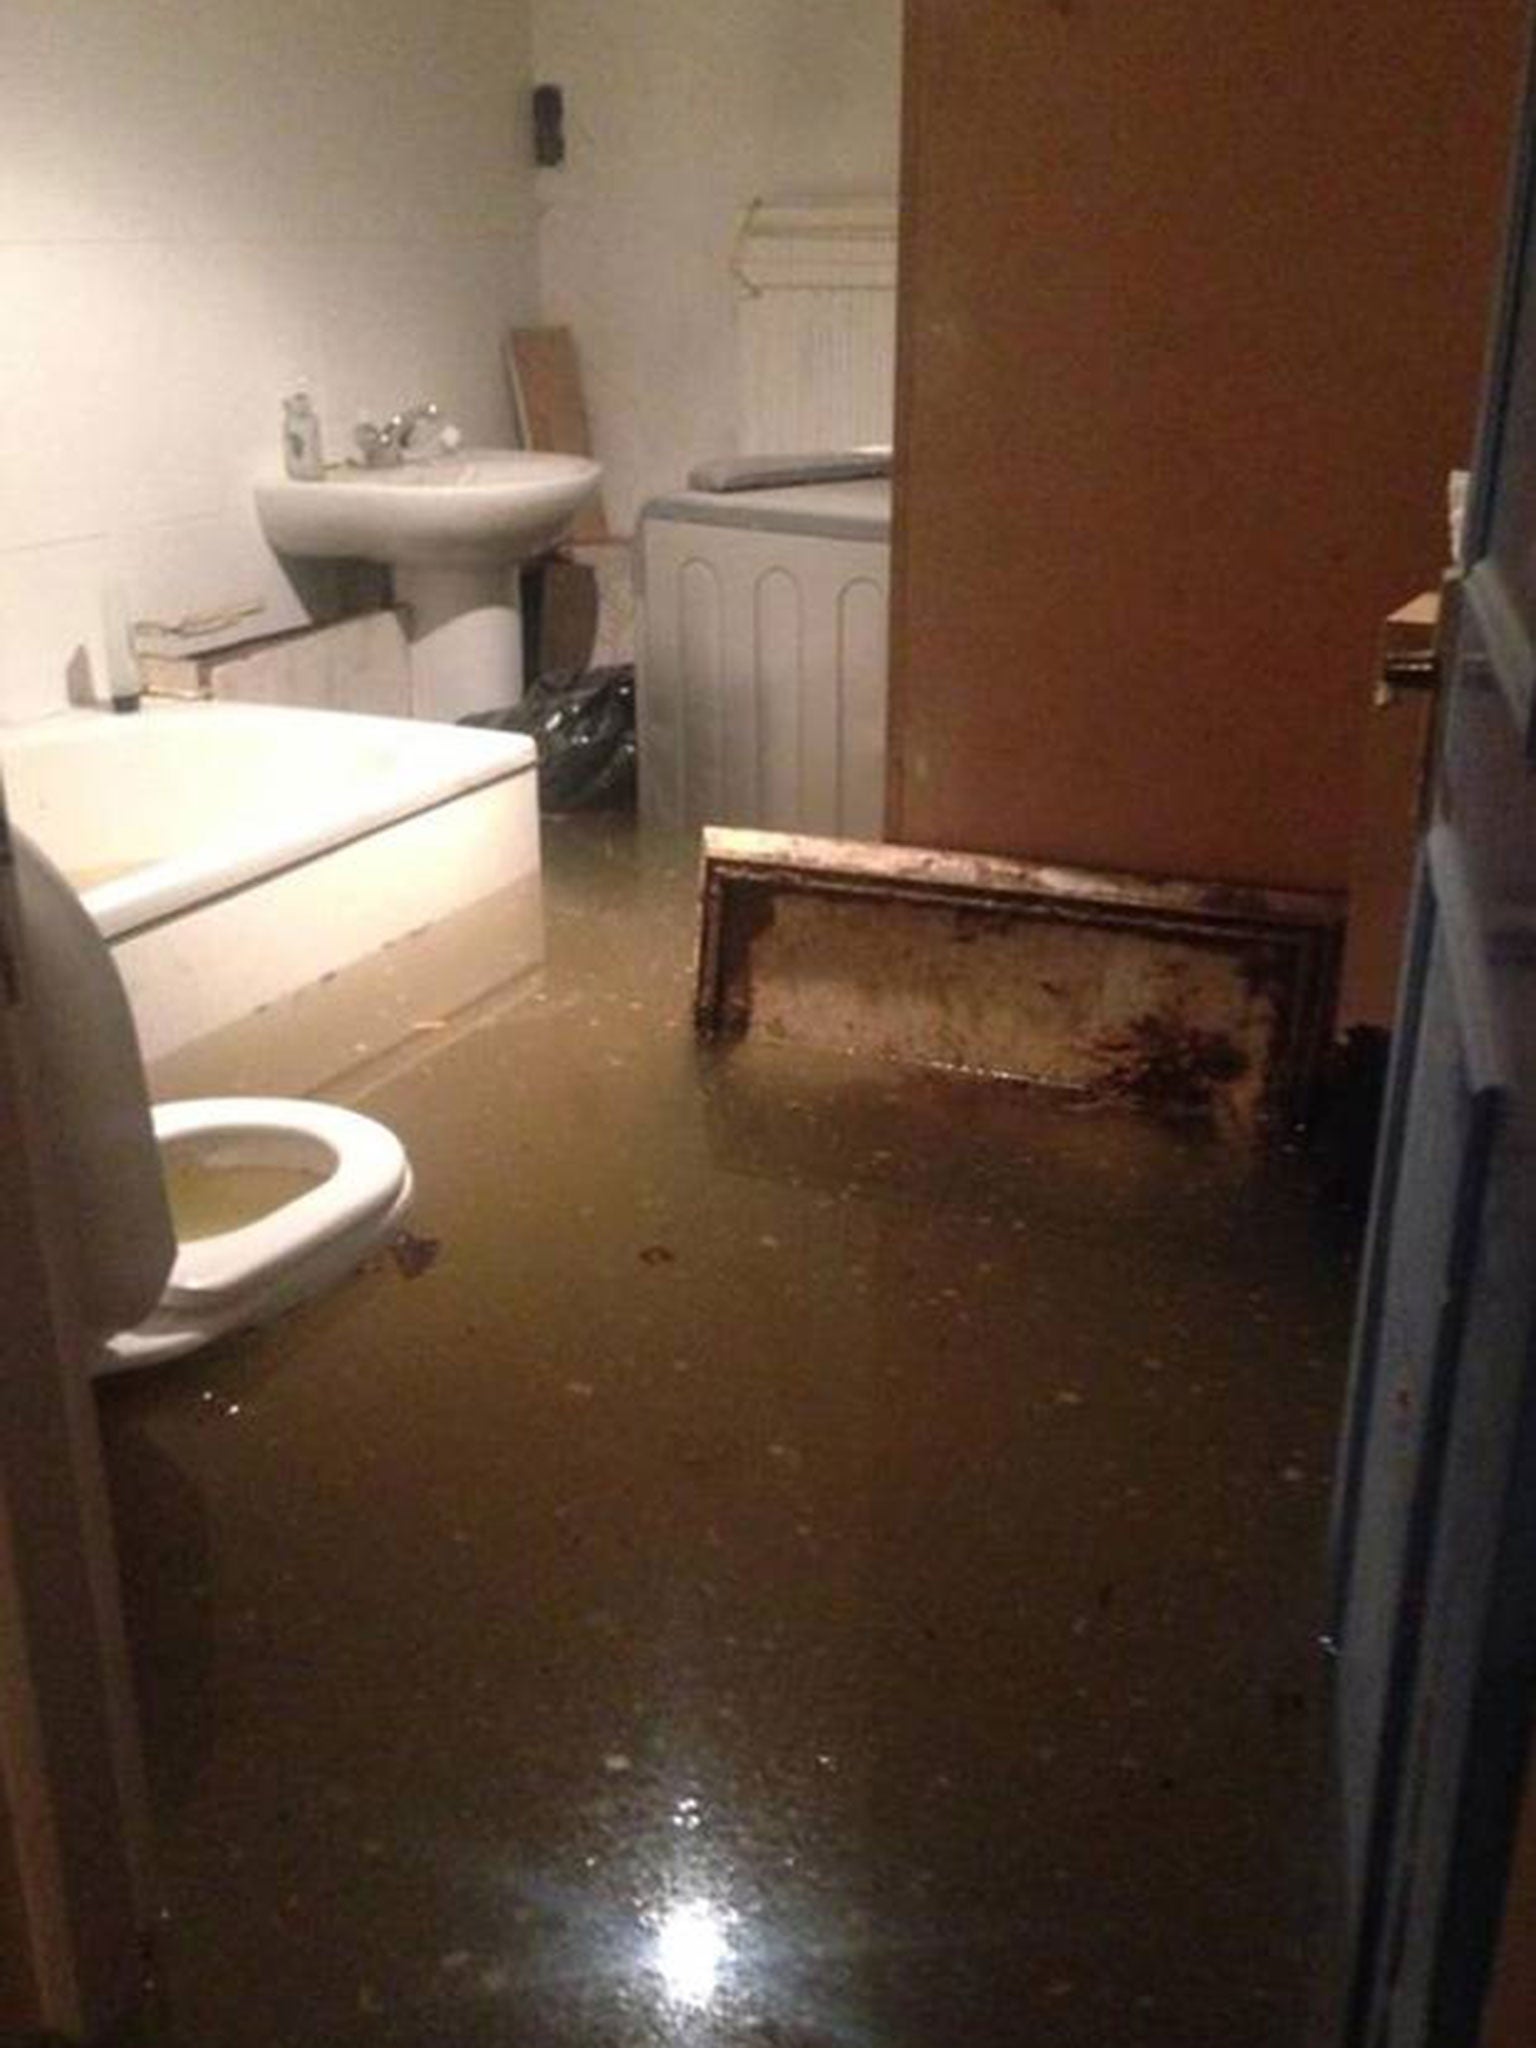 A picture of Mr Ludmon's flooded bathroom